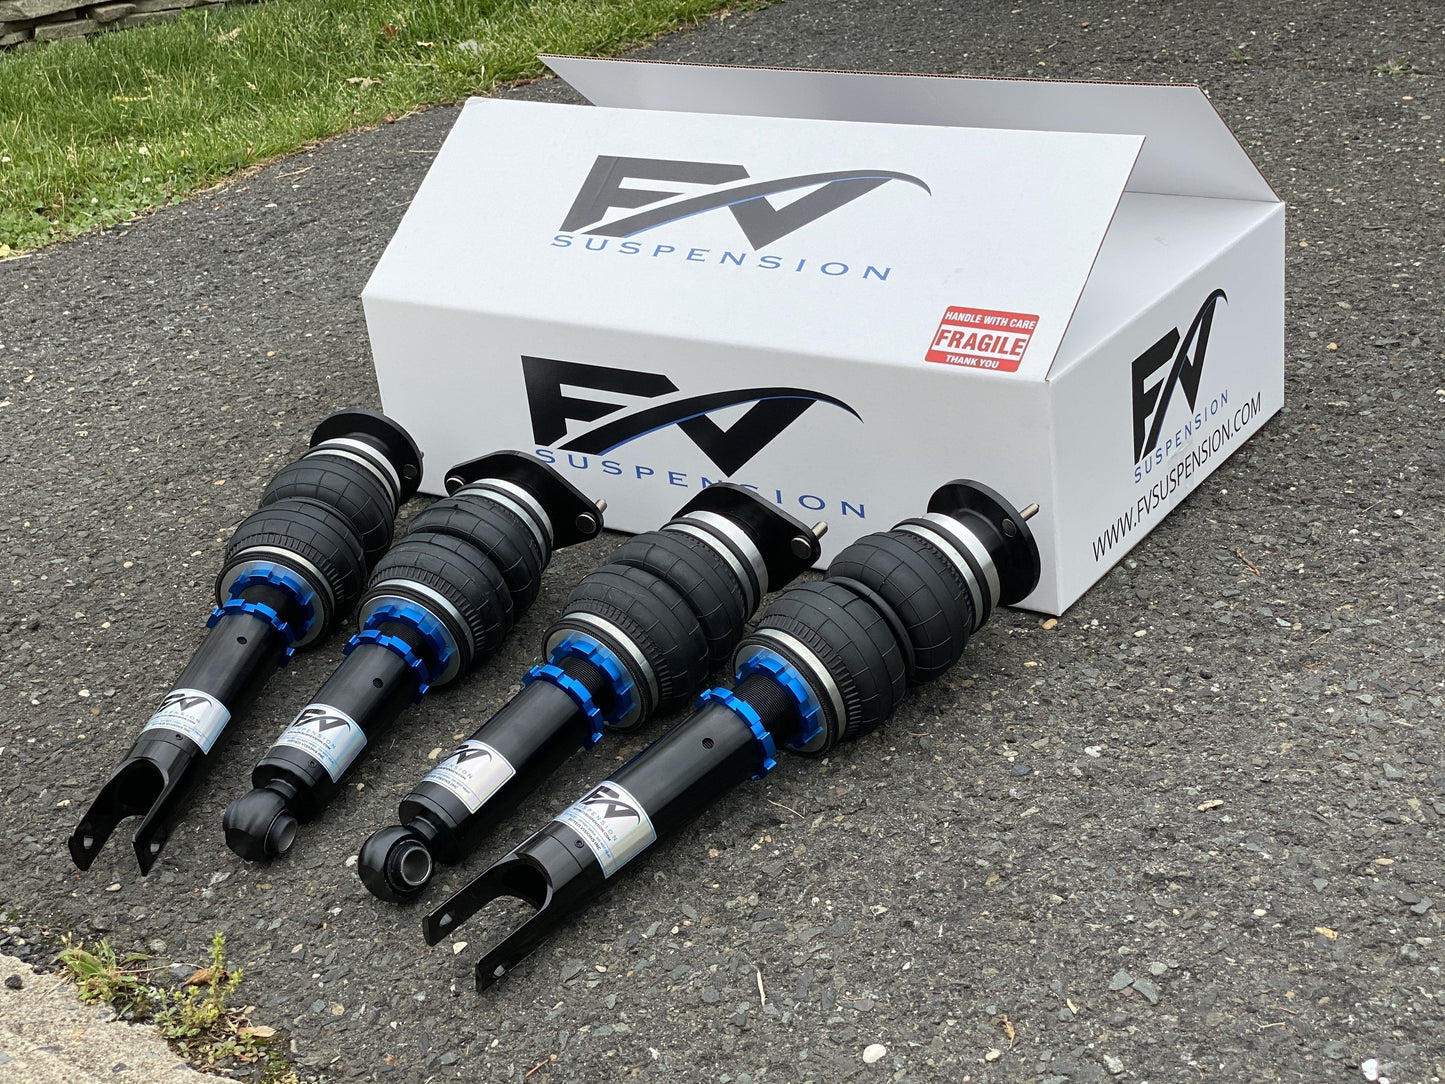 FV Suspension 3H Tier 3 Complete Air Ride kit for 04-11 Cadillac STS - FVALtier3kit158